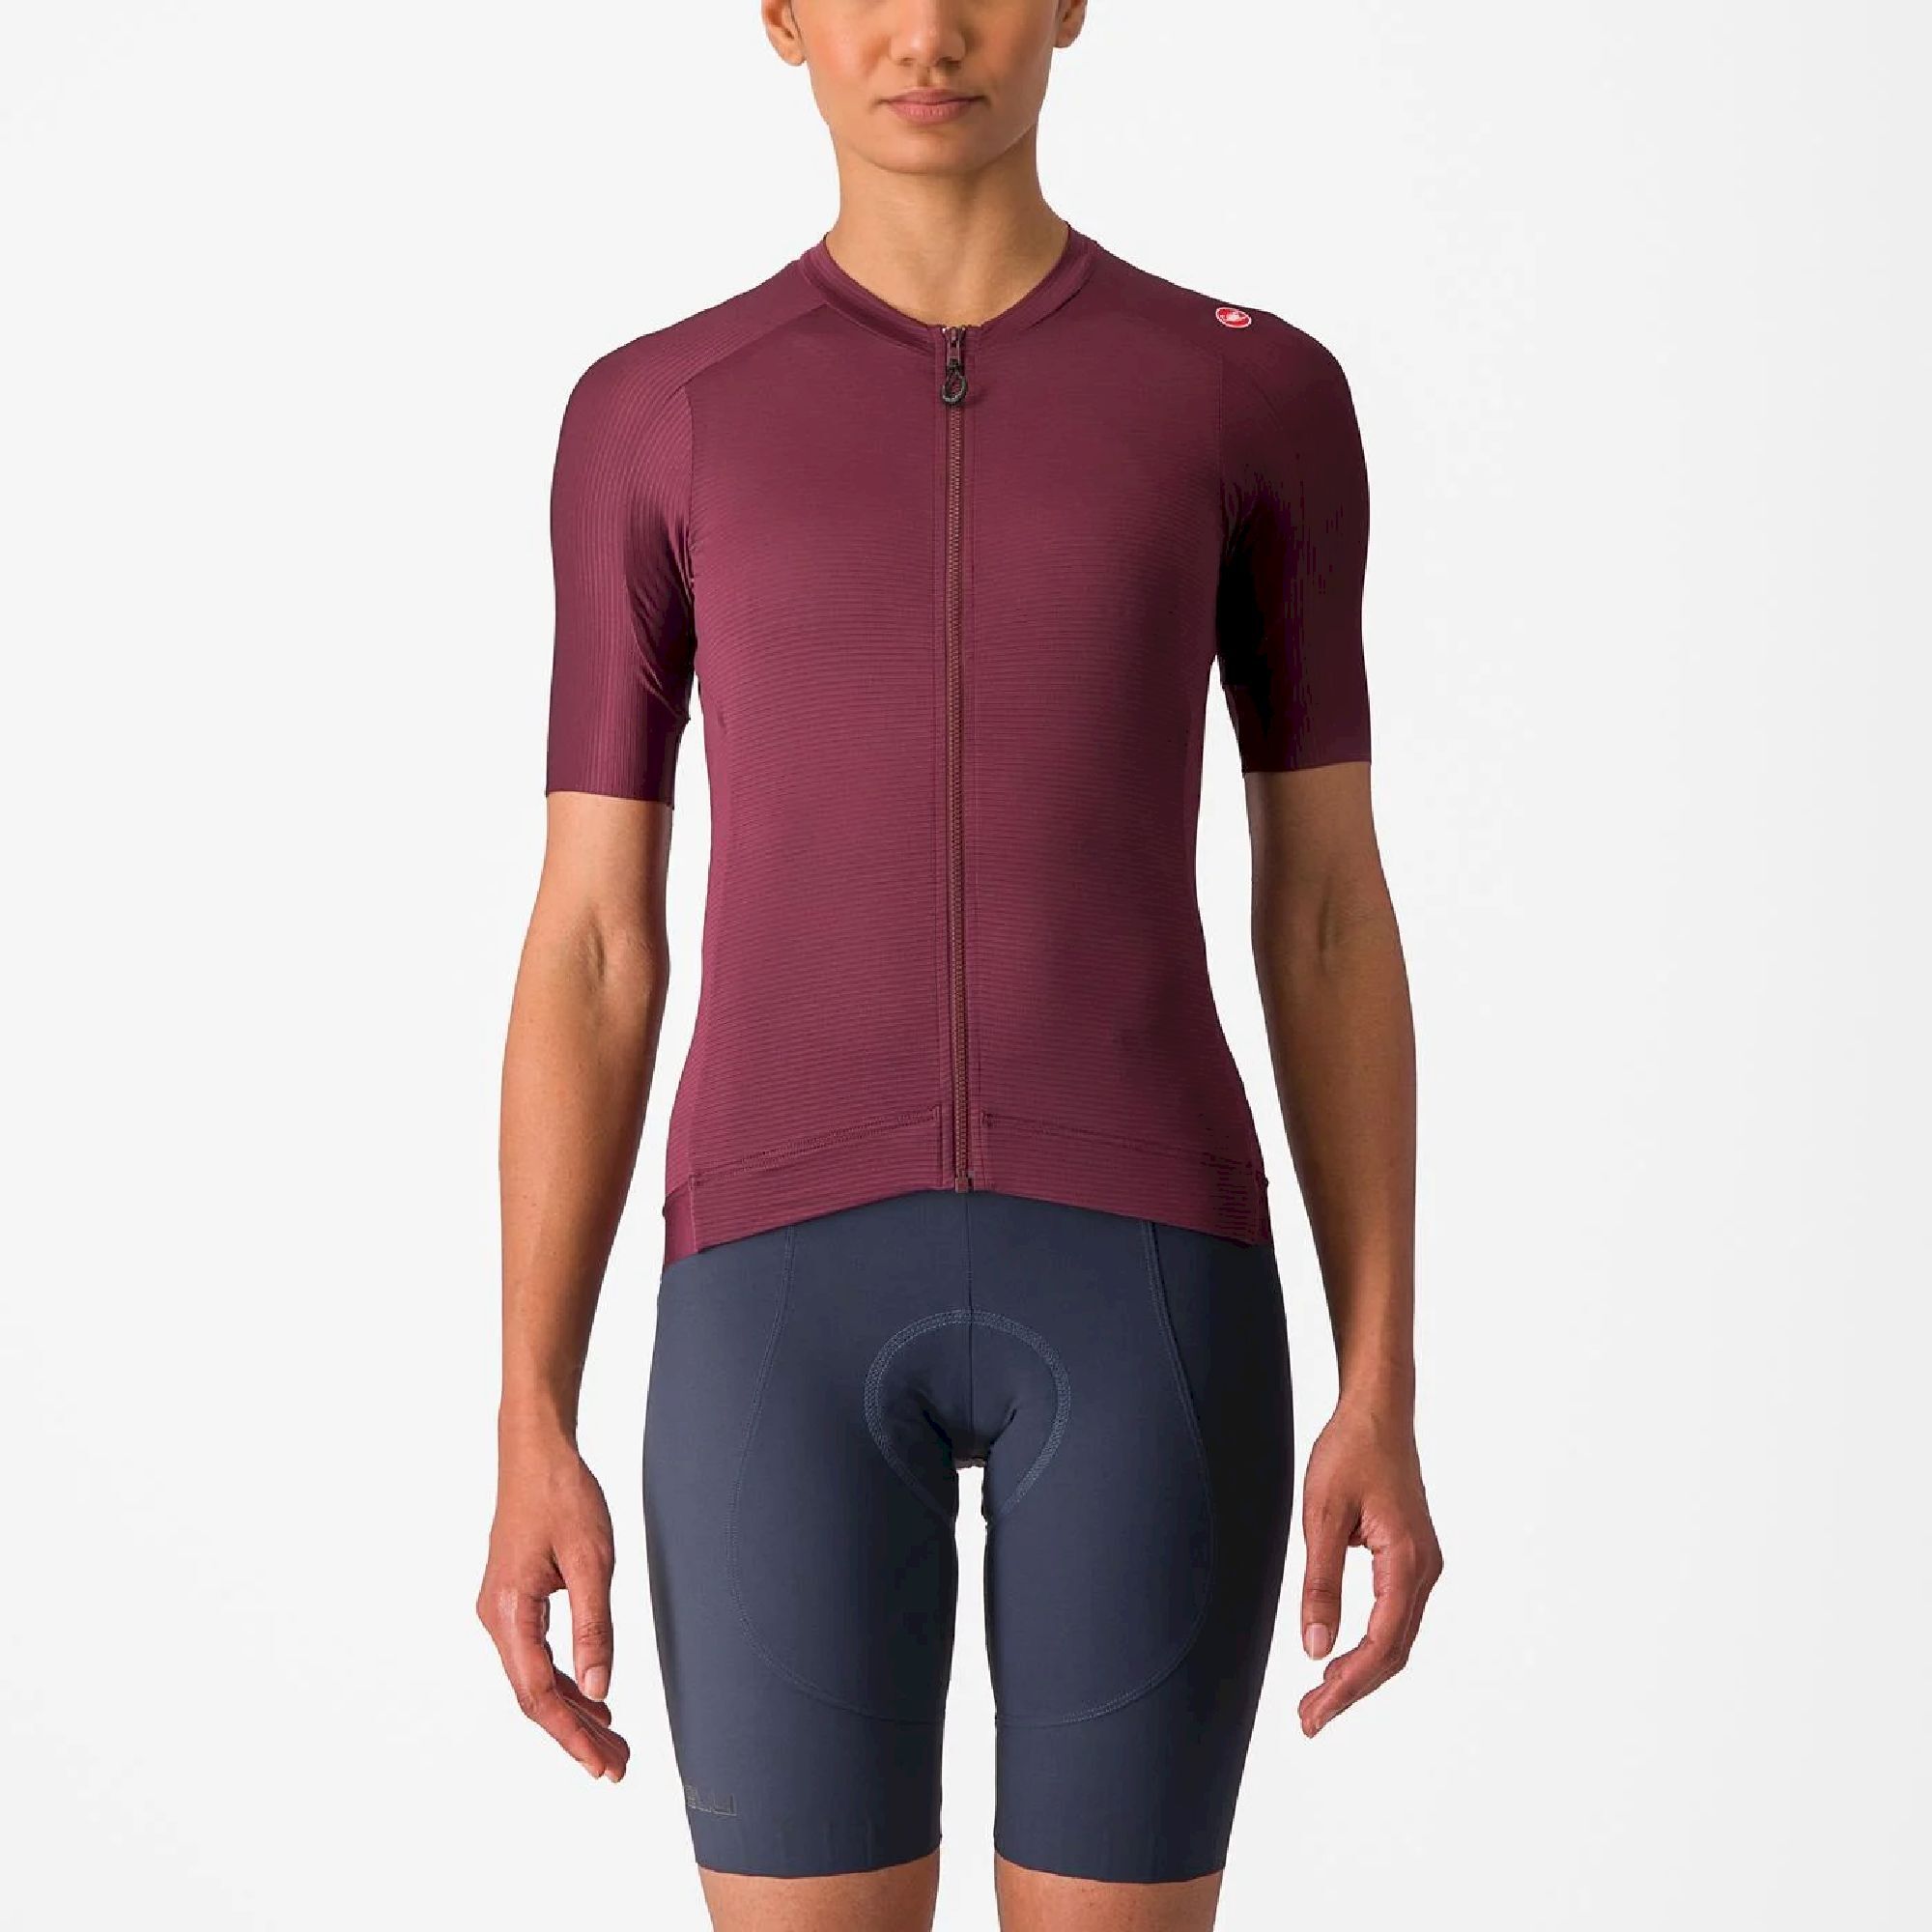 Castelli Espresso W Jersey - Maillot ciclismo - Mujer | Hardloop